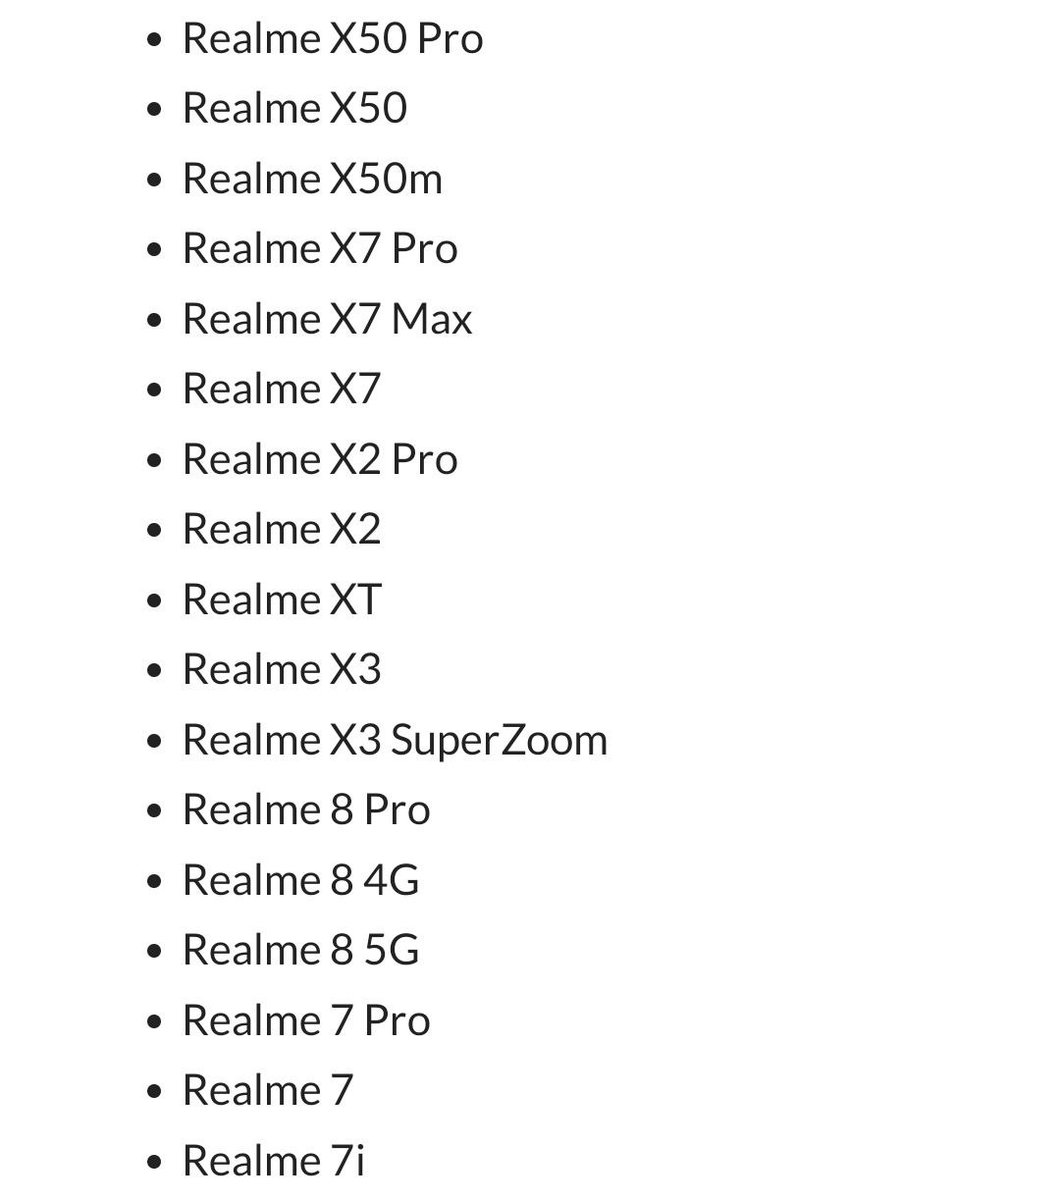 Wow....I'll get 7GB Virtual RAM on my #RealmeX2 soon 😳🔥

Other supported Realme devices: